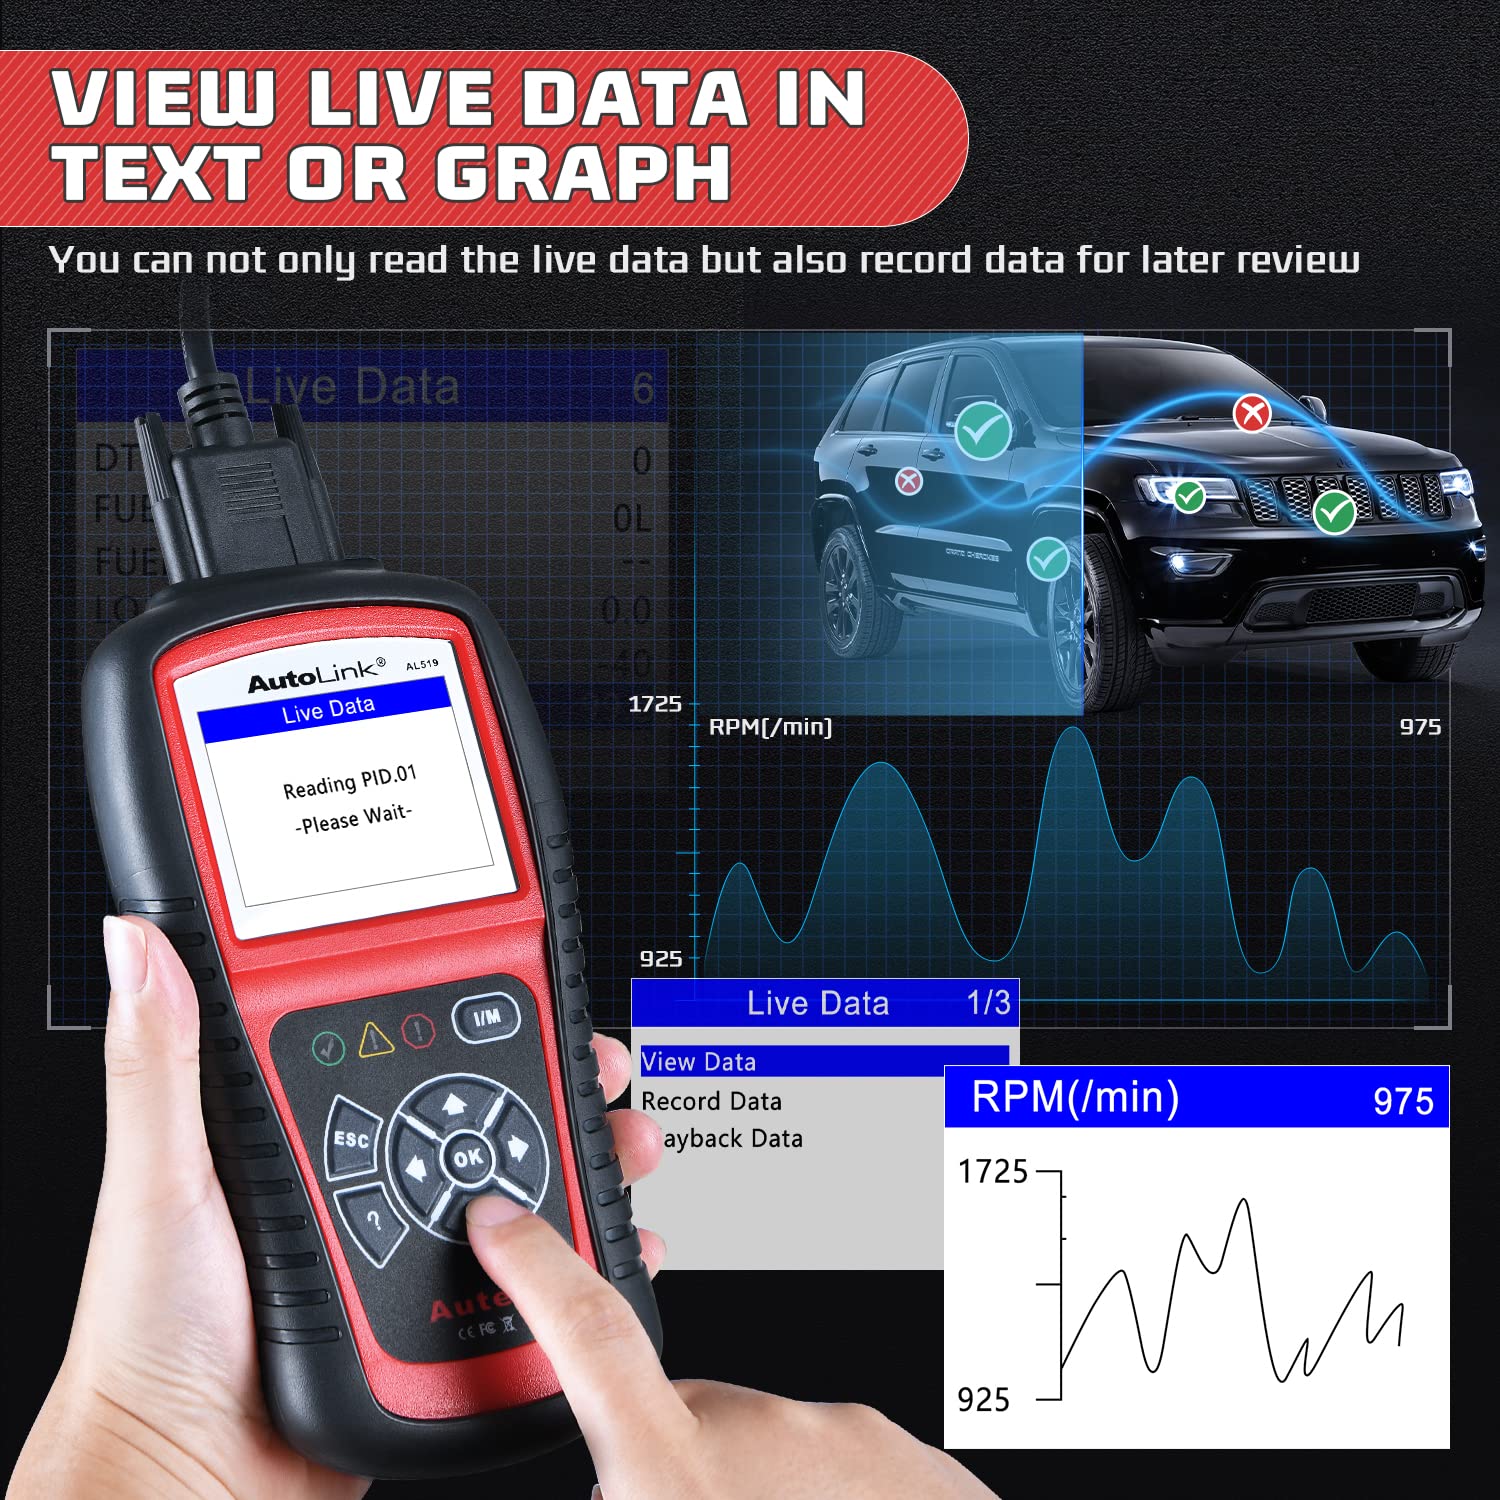 Review Live Data & Recording Data & PlayBack Data